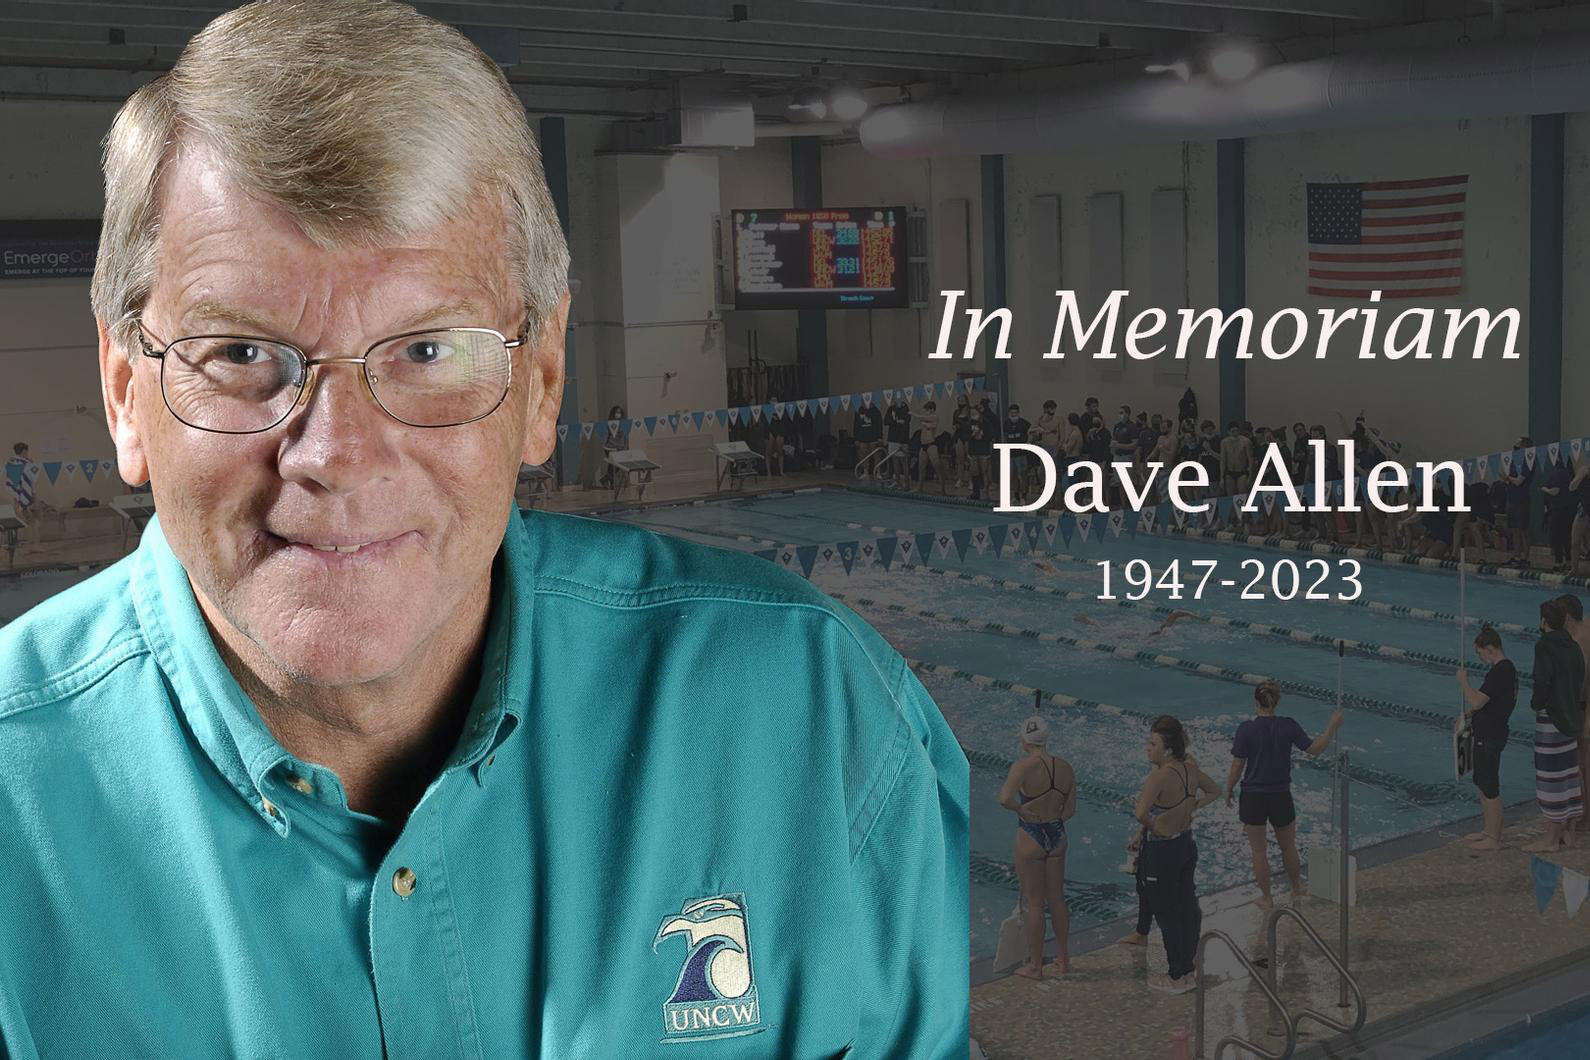 Dave Allen founded the UNCW swimming program in the late 70s and molded it into a recurrent power in the Colonial Athletic Association.